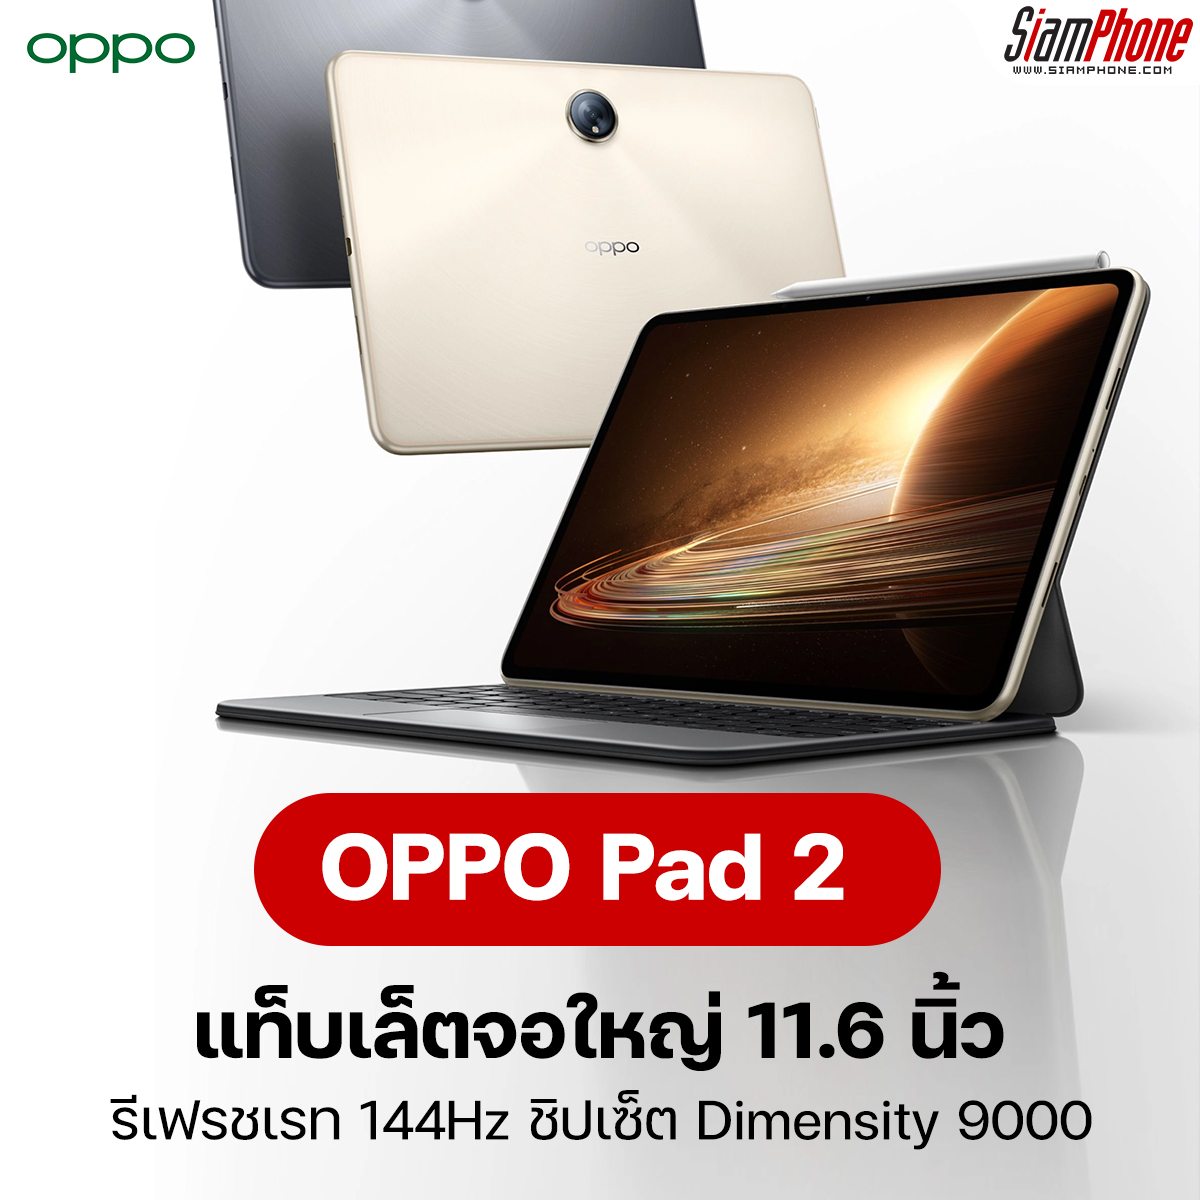 OPPO Pad 2 tablet, large screen, 11.6 inches, refresh rate 144Hz, Dimensity 9000 chipset